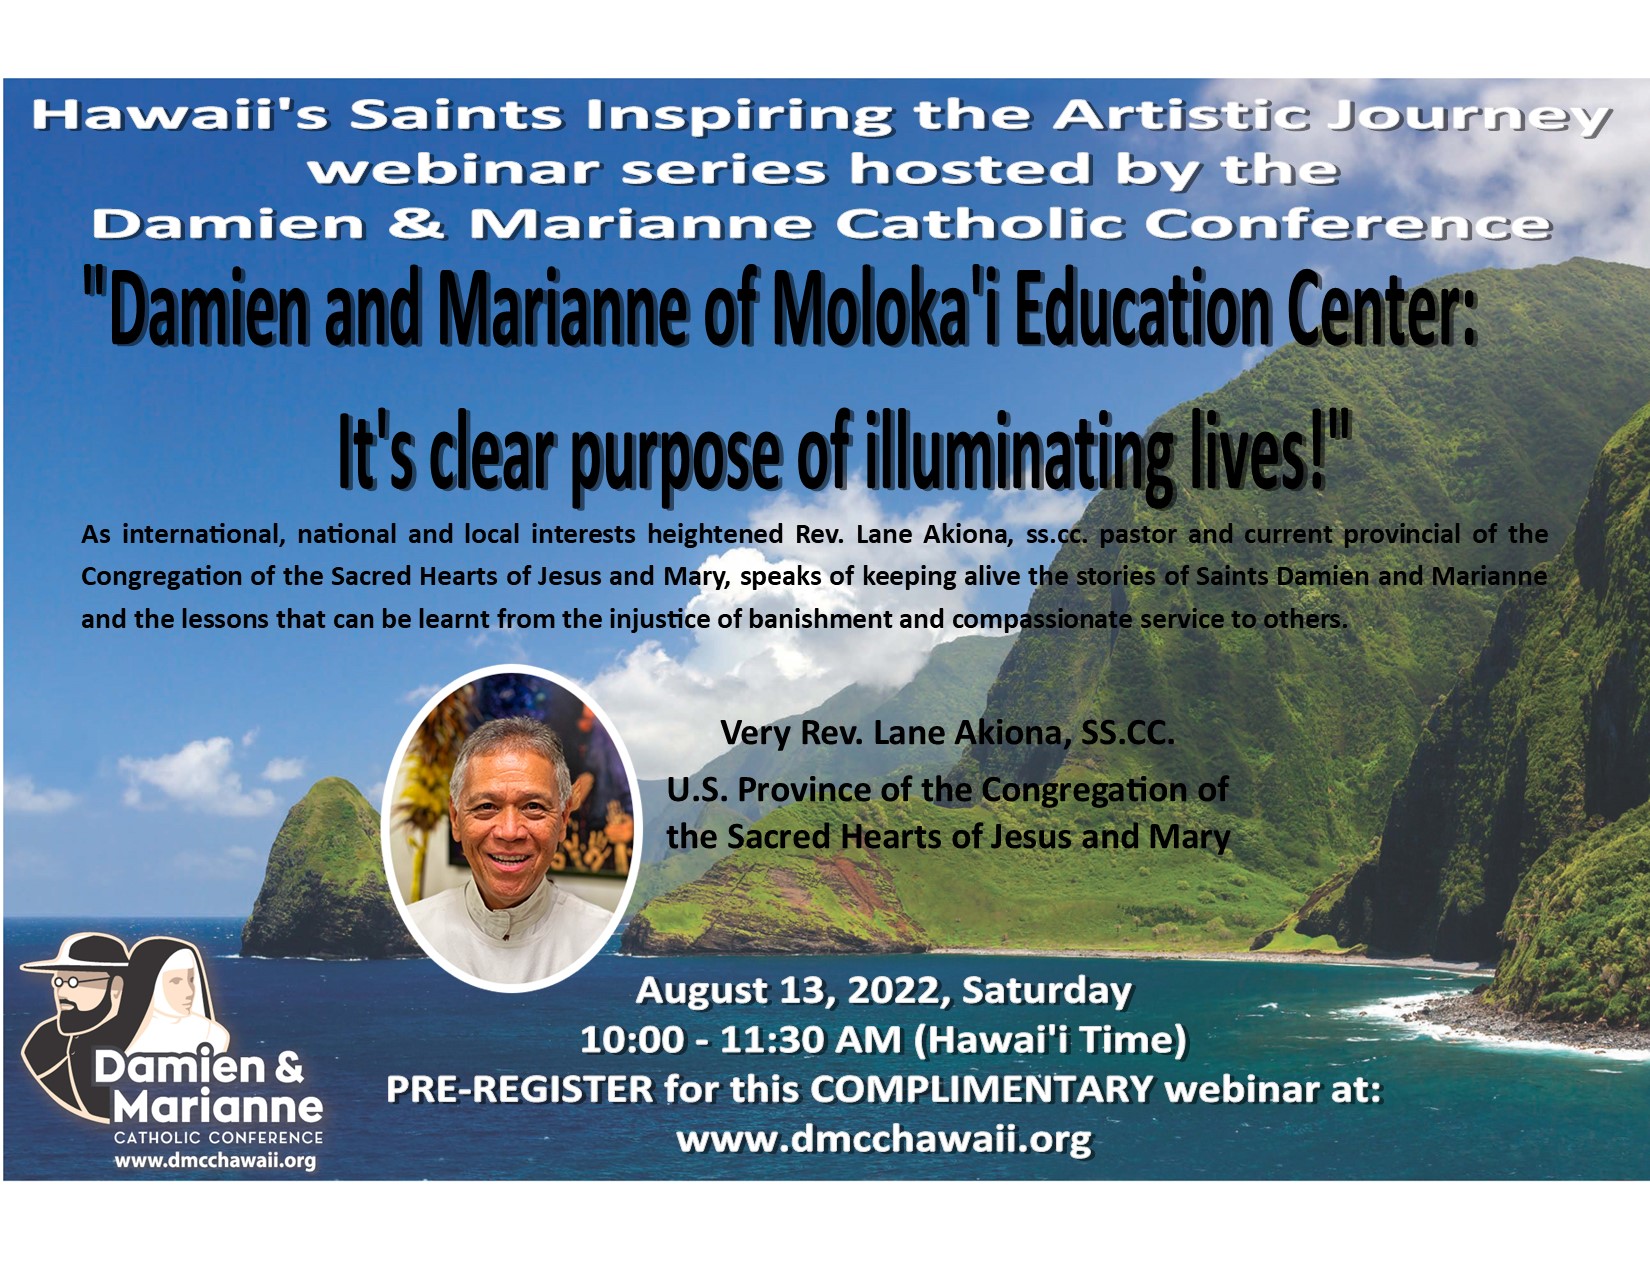 Damien and Marianne of Moloka’i Education Center: It’s clear purpose of illuminating lives!